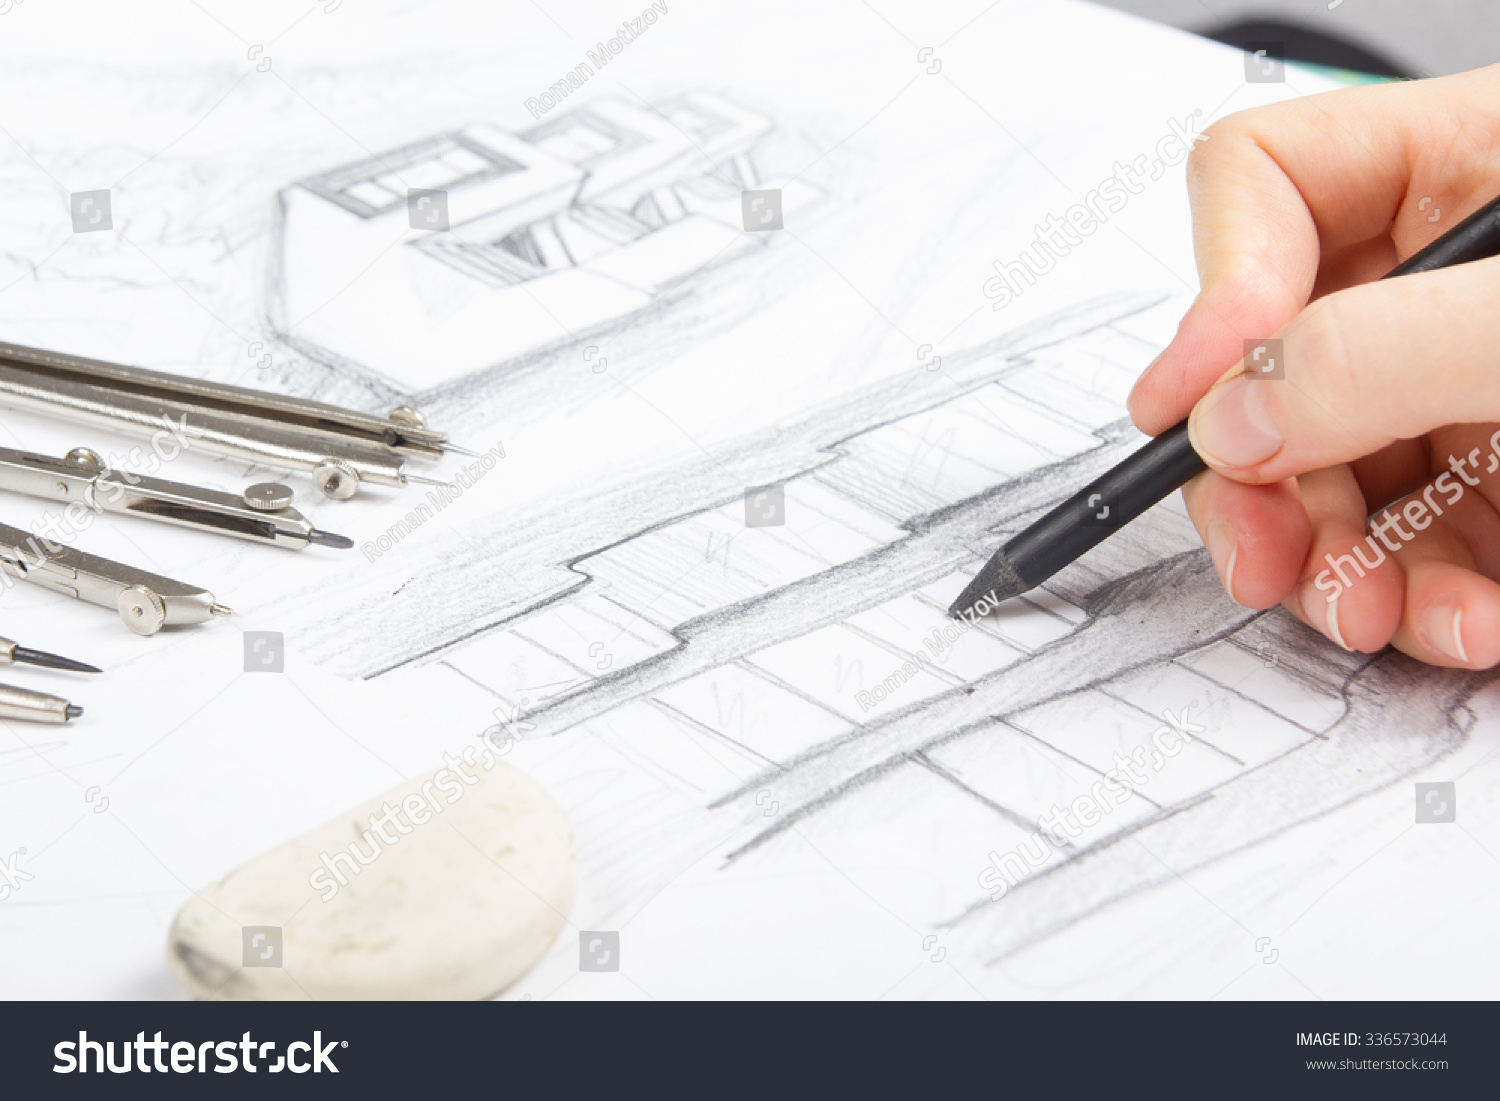 Architect working on blueprint. Architects workplace - architectural project, blueprints, eraser, pencil and divider compass. Construction concept. Engineering tools #336573044